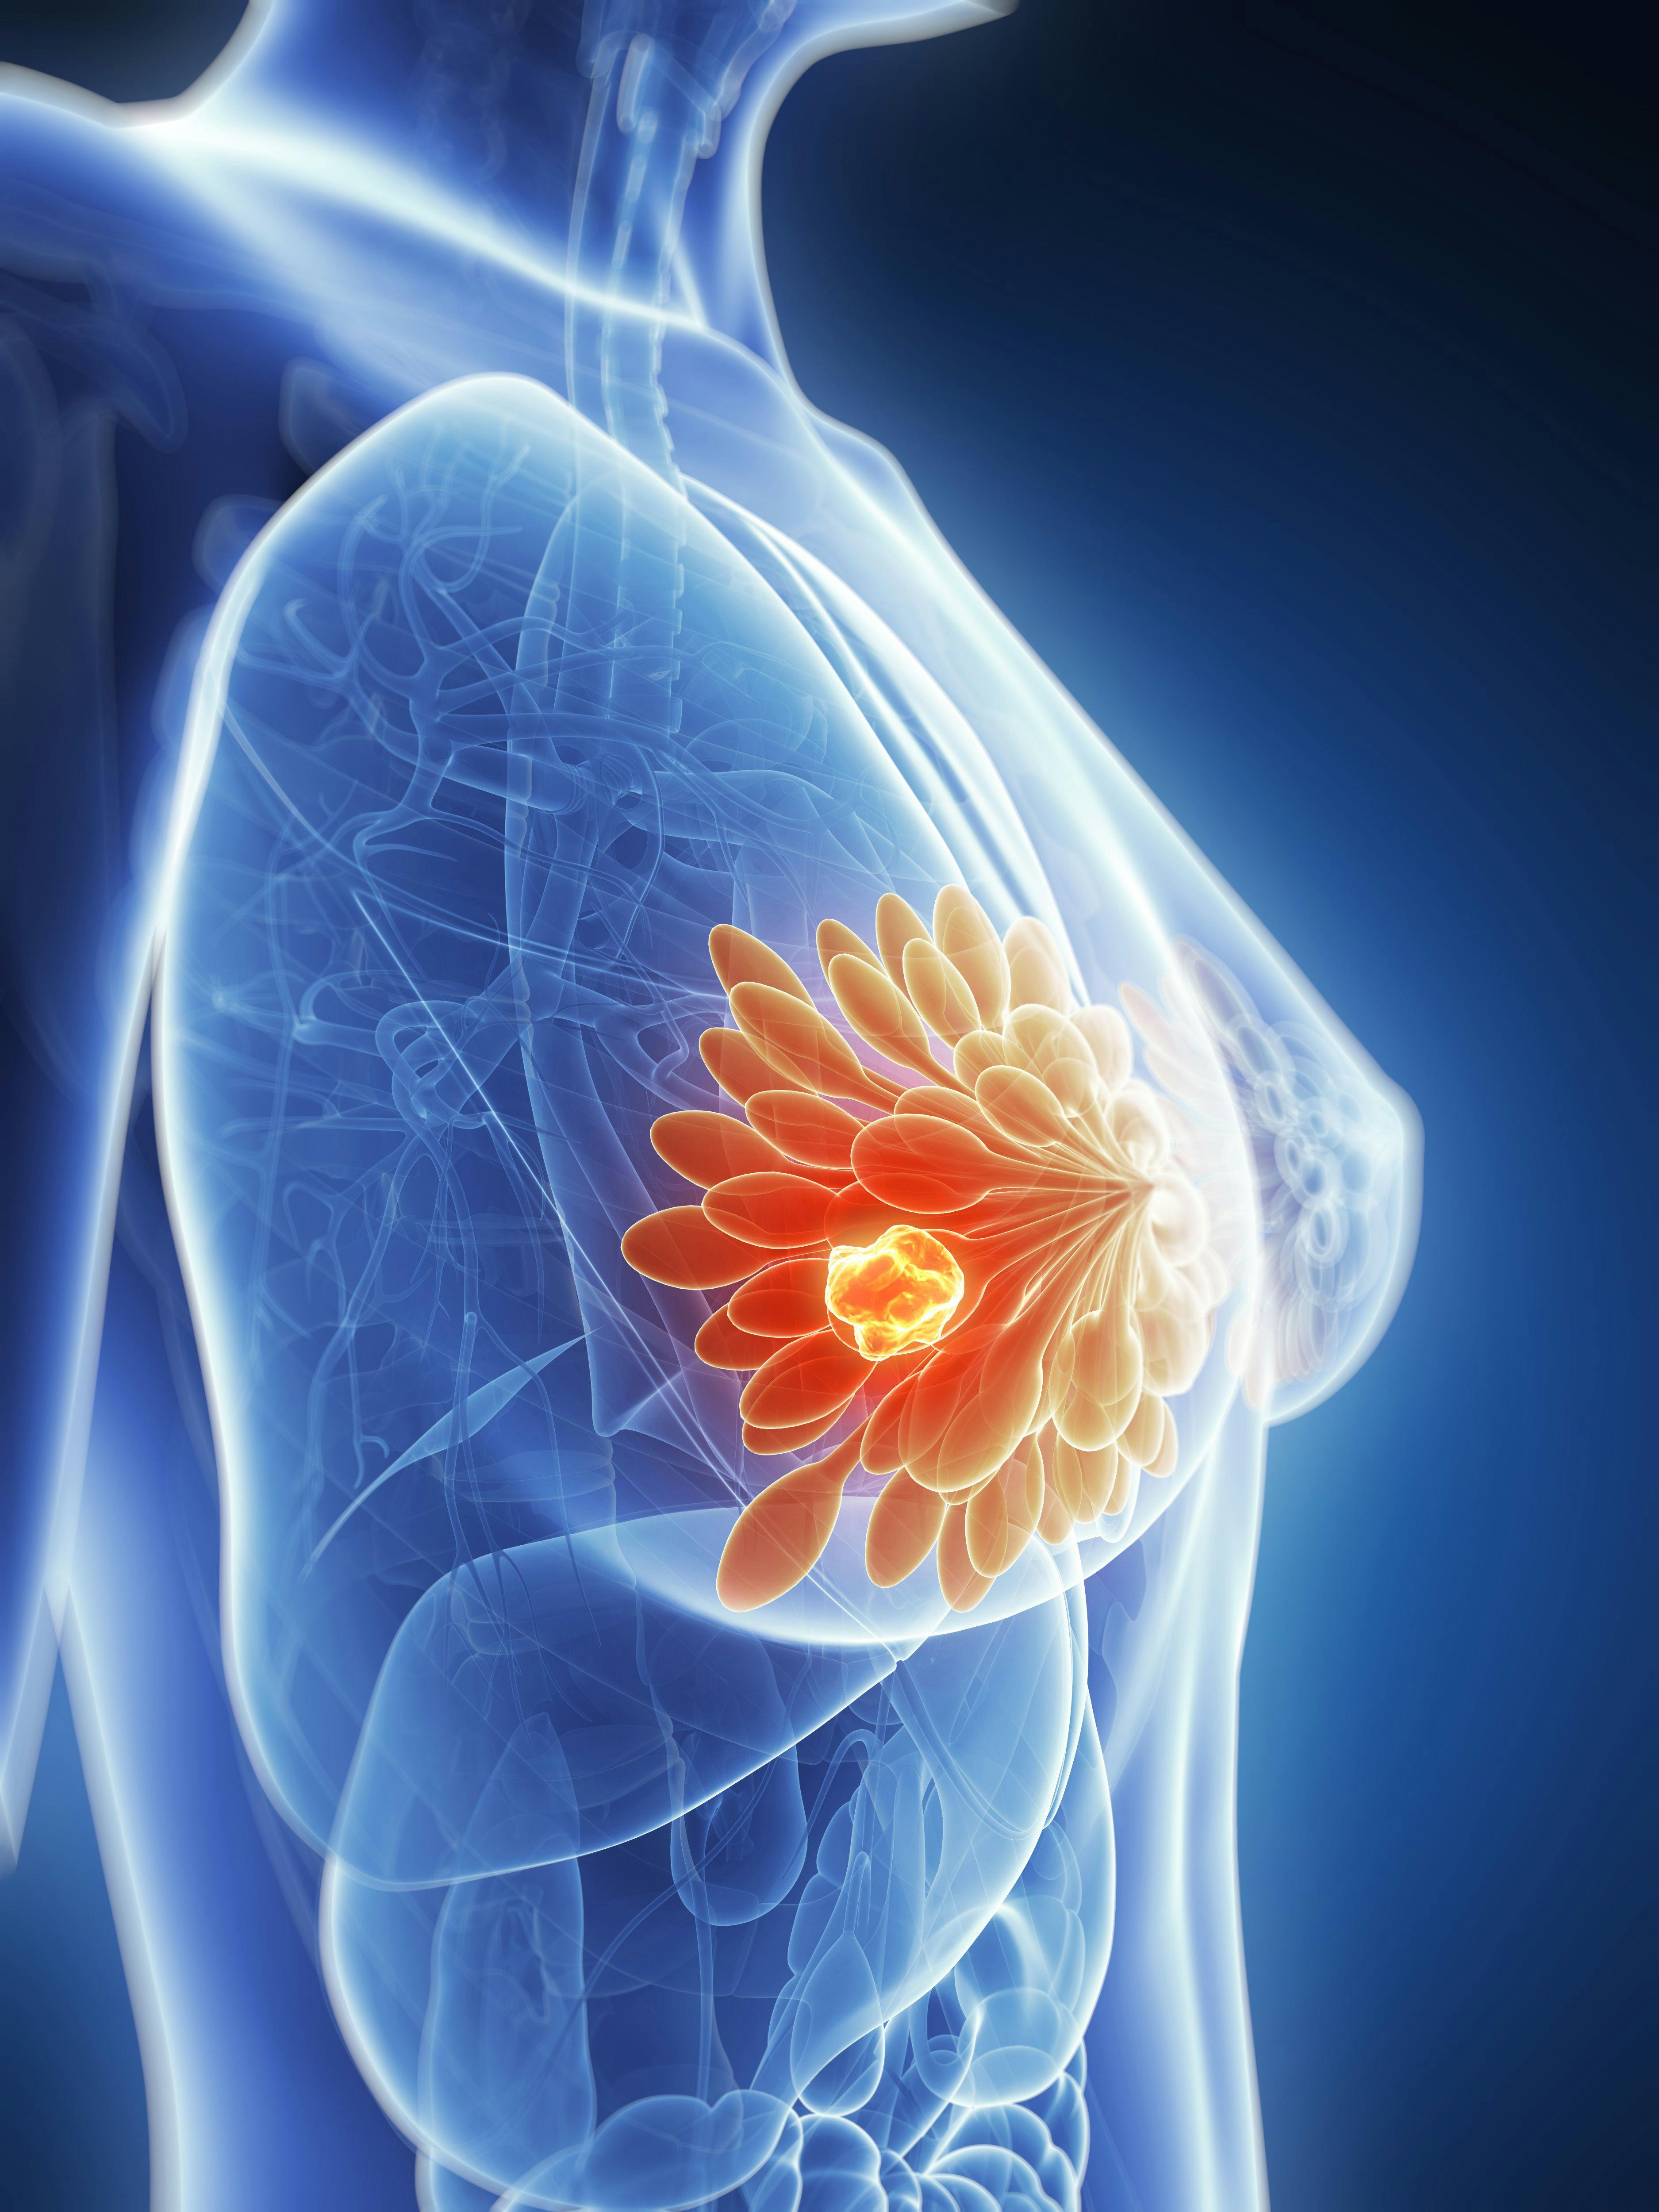 A study from the Yale Cancer Center potentially introduces a drug design platform to fight drug resistance for patients with HER2-positive breast cancer and ovarian cancer.